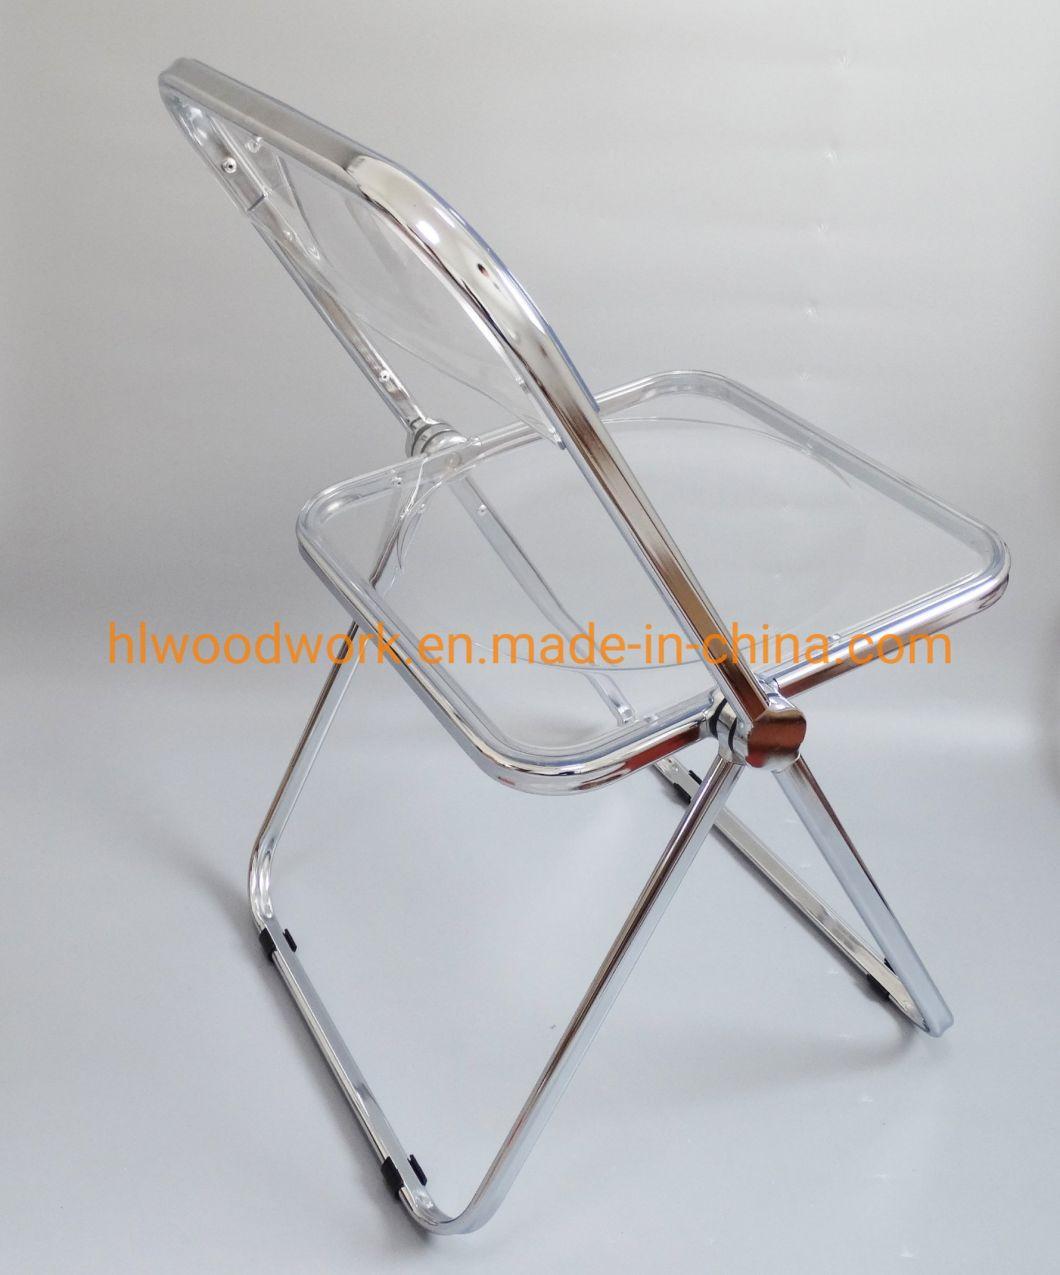 Modern Black Plastic Folded Chair Office/Bar/Dining/Leisure/Banquet/Wedding/Meeting Chair in Chrome Frame Transparent Clear PC Plastic Dining Chair